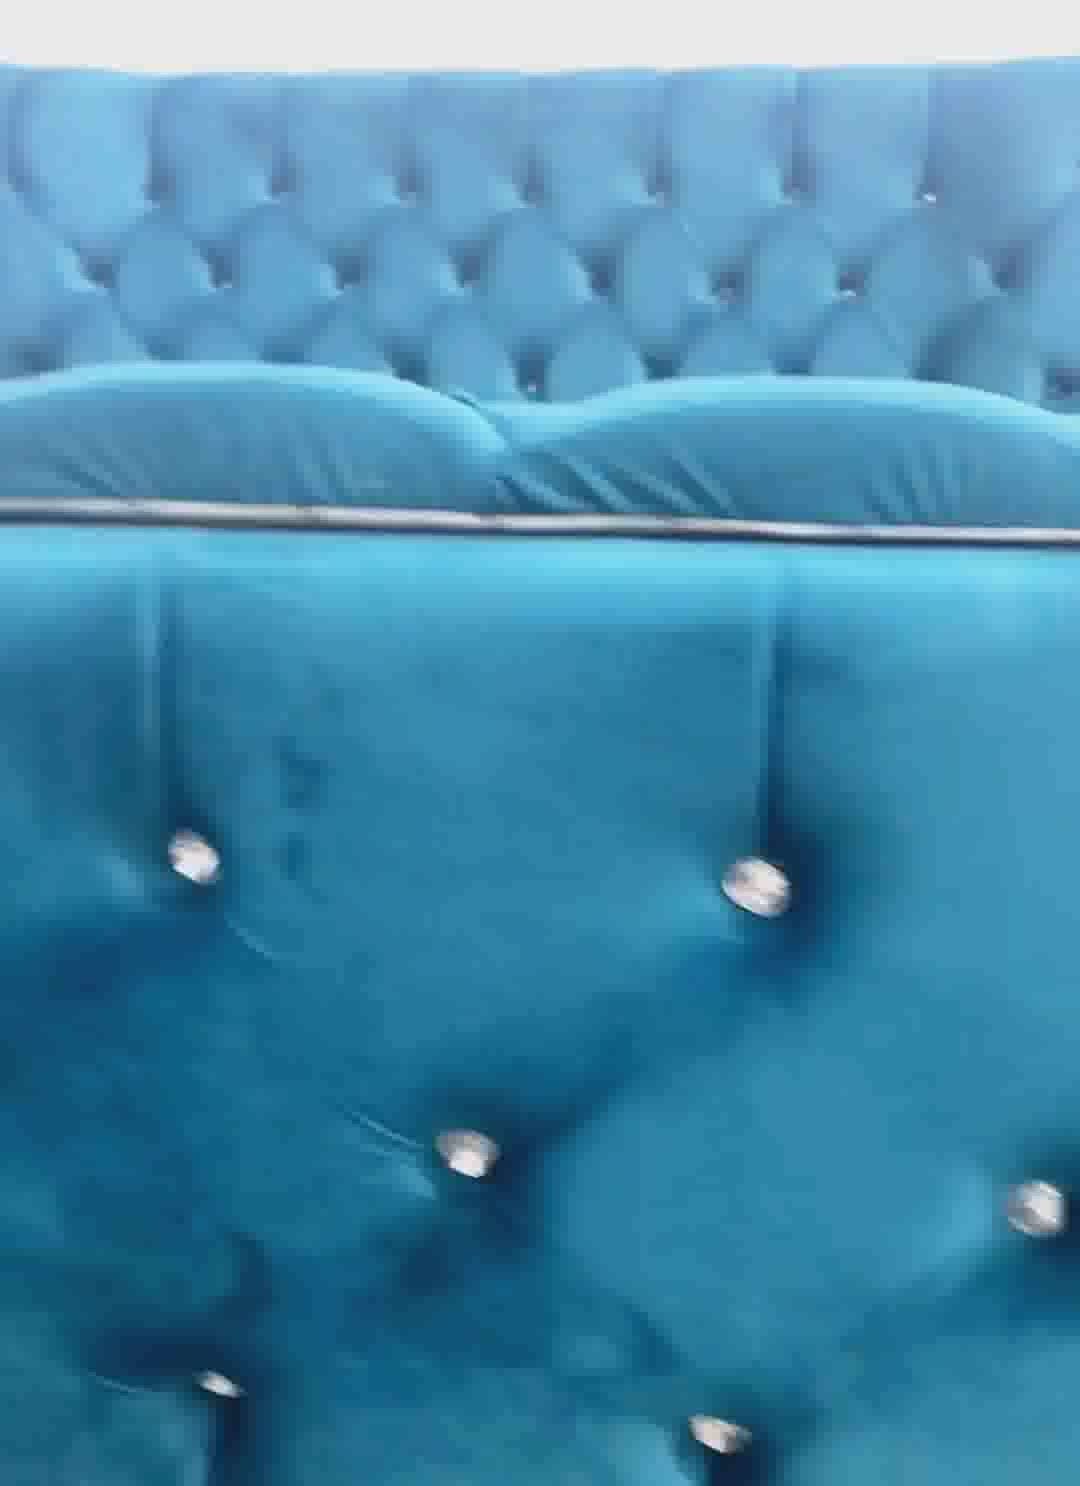 Double bed 😍

Direct factory manufacturing wholesale price best quality 
Low price

immi furniture
For Detail contact -
Call & WhatsAp

6262444804
7869916892
#immifurniture

Address : chandan nagar sirpur talab ke aage dhar road indore
 http://instagram.com/immifurniture
 https://youtube.com/channel/UC4IdjOlIdfWCK2YASlpFXgQ
 https://www.facebook.com/Immi-furniture-105064295145638/

#furniture #interiordesign #homedecor #design #interior #furnituredesign #home #decor #sofa #architecture #interiors #homedesign  #decoration #art #MadhyaPradesh #Indore #indorewale #indorecity #indorefurniture #indianfood #indorediaries #india  #indianwedding #indiandufurniture #sofaset #sofa #bed #bedroomdesigns #trand #viralvideo